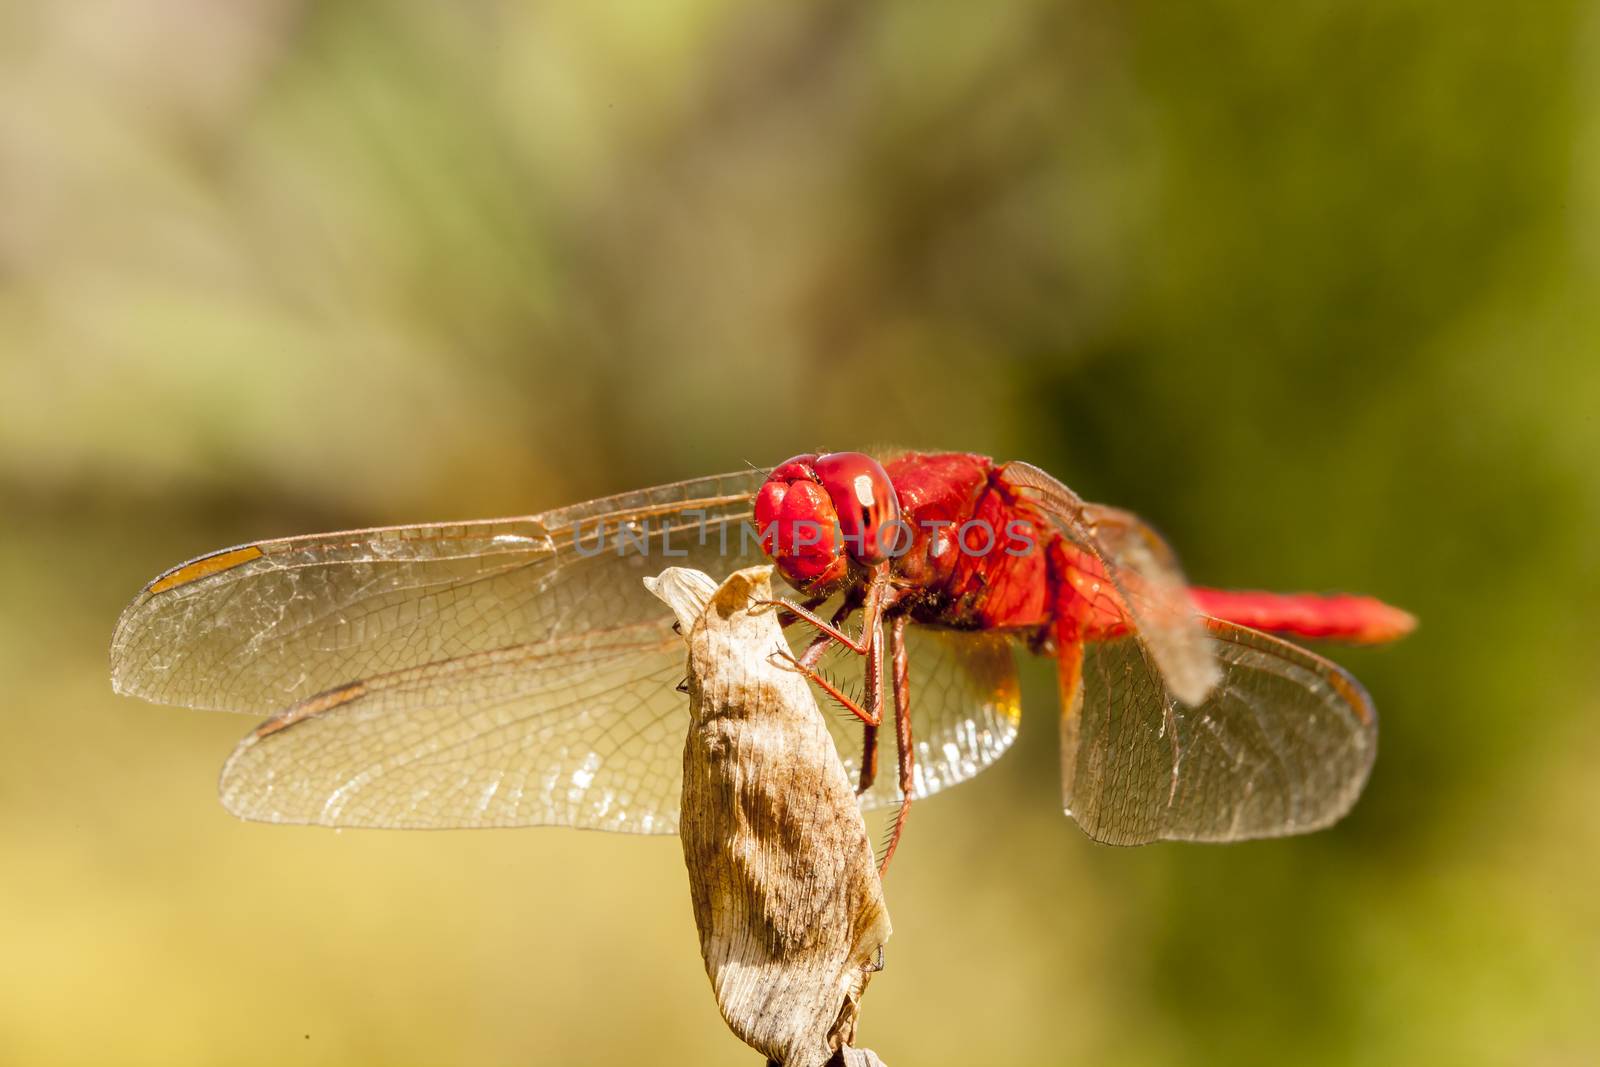 This big red dragonfly perched on top of dried flowers.